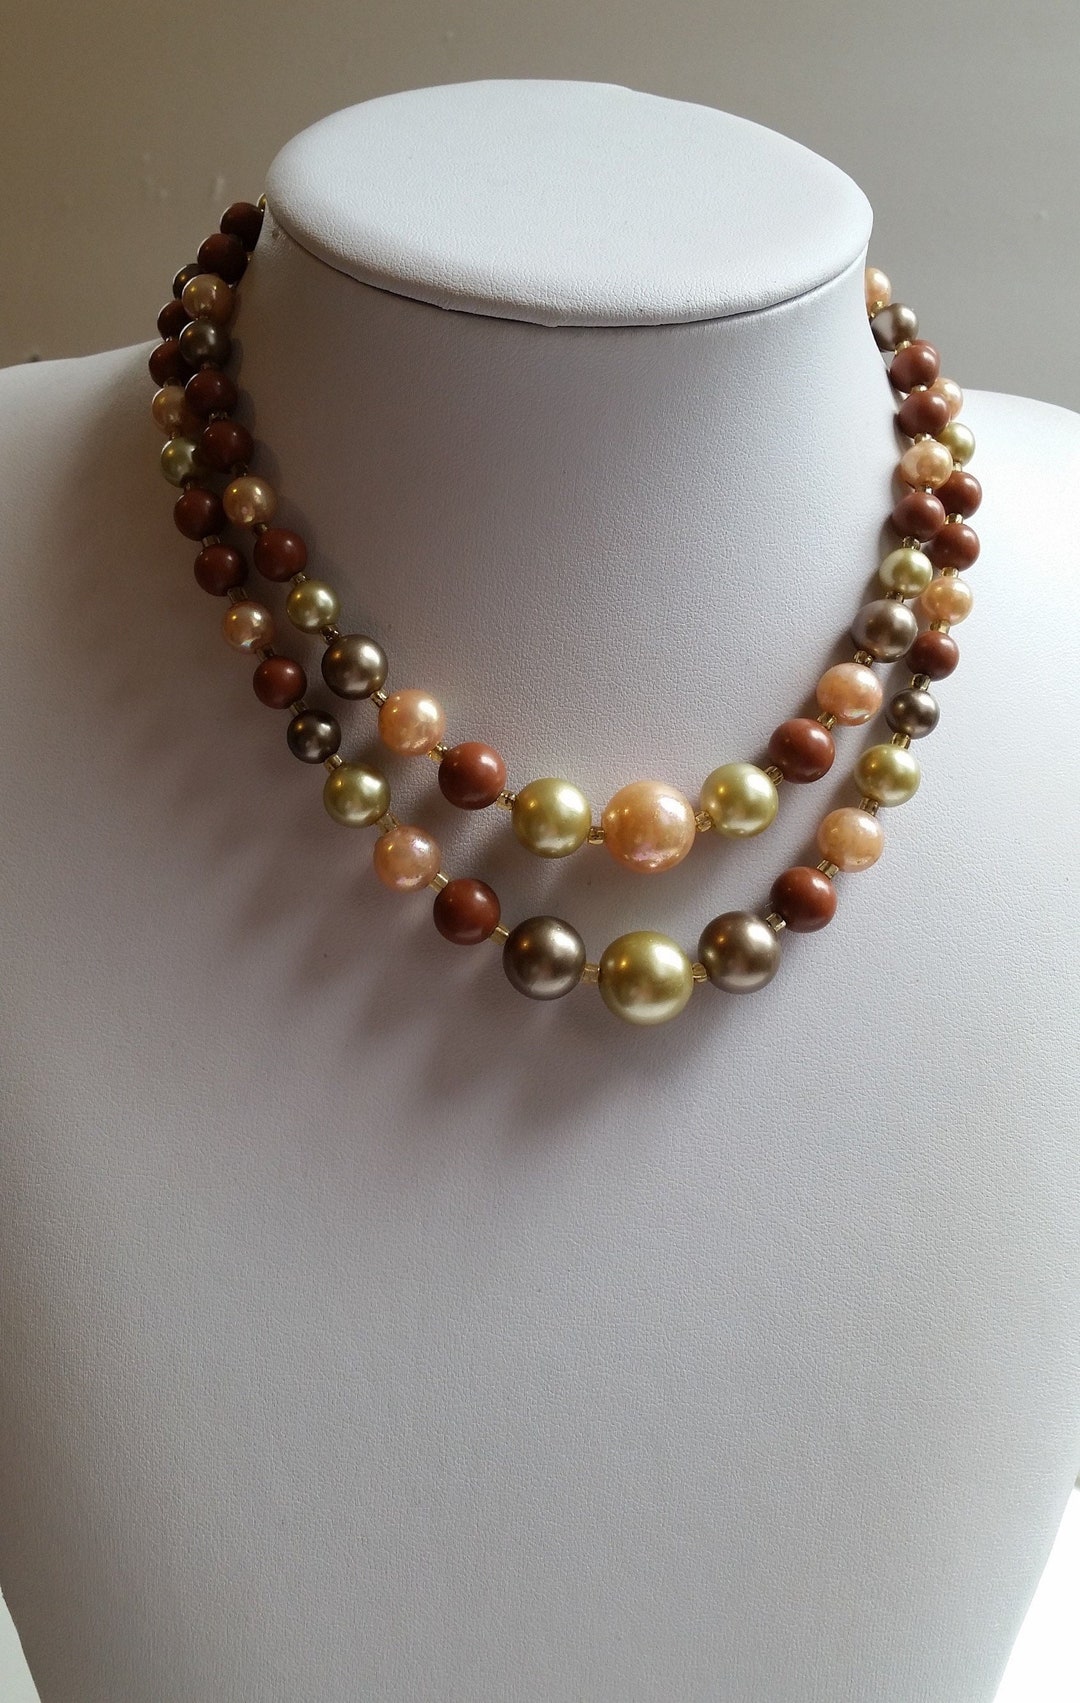 Hong Kong Stamped 2 Strand Multi Tone Necklace - Etsy